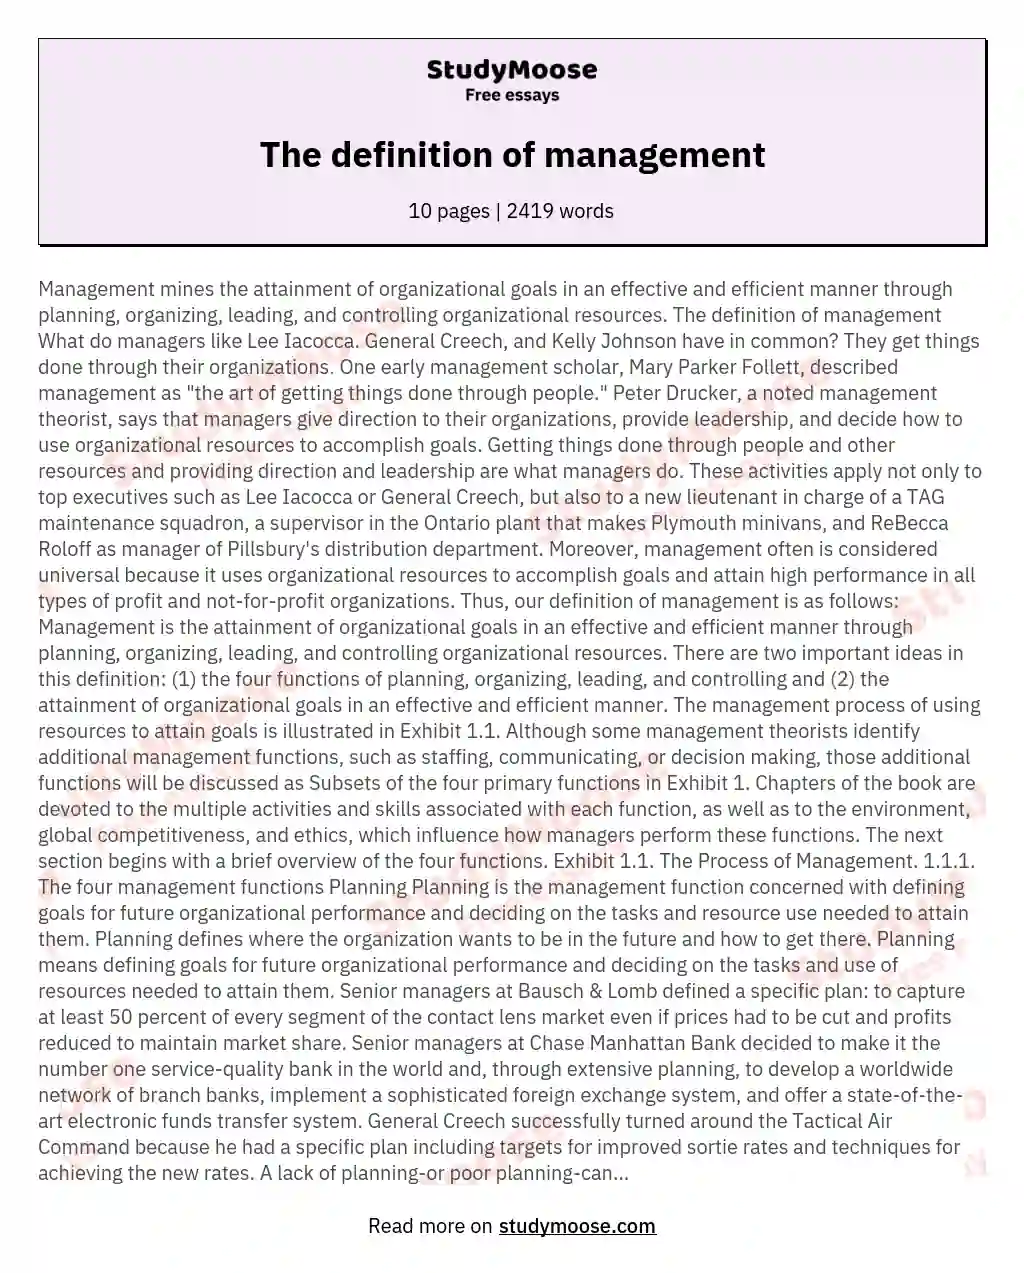 The definition of management